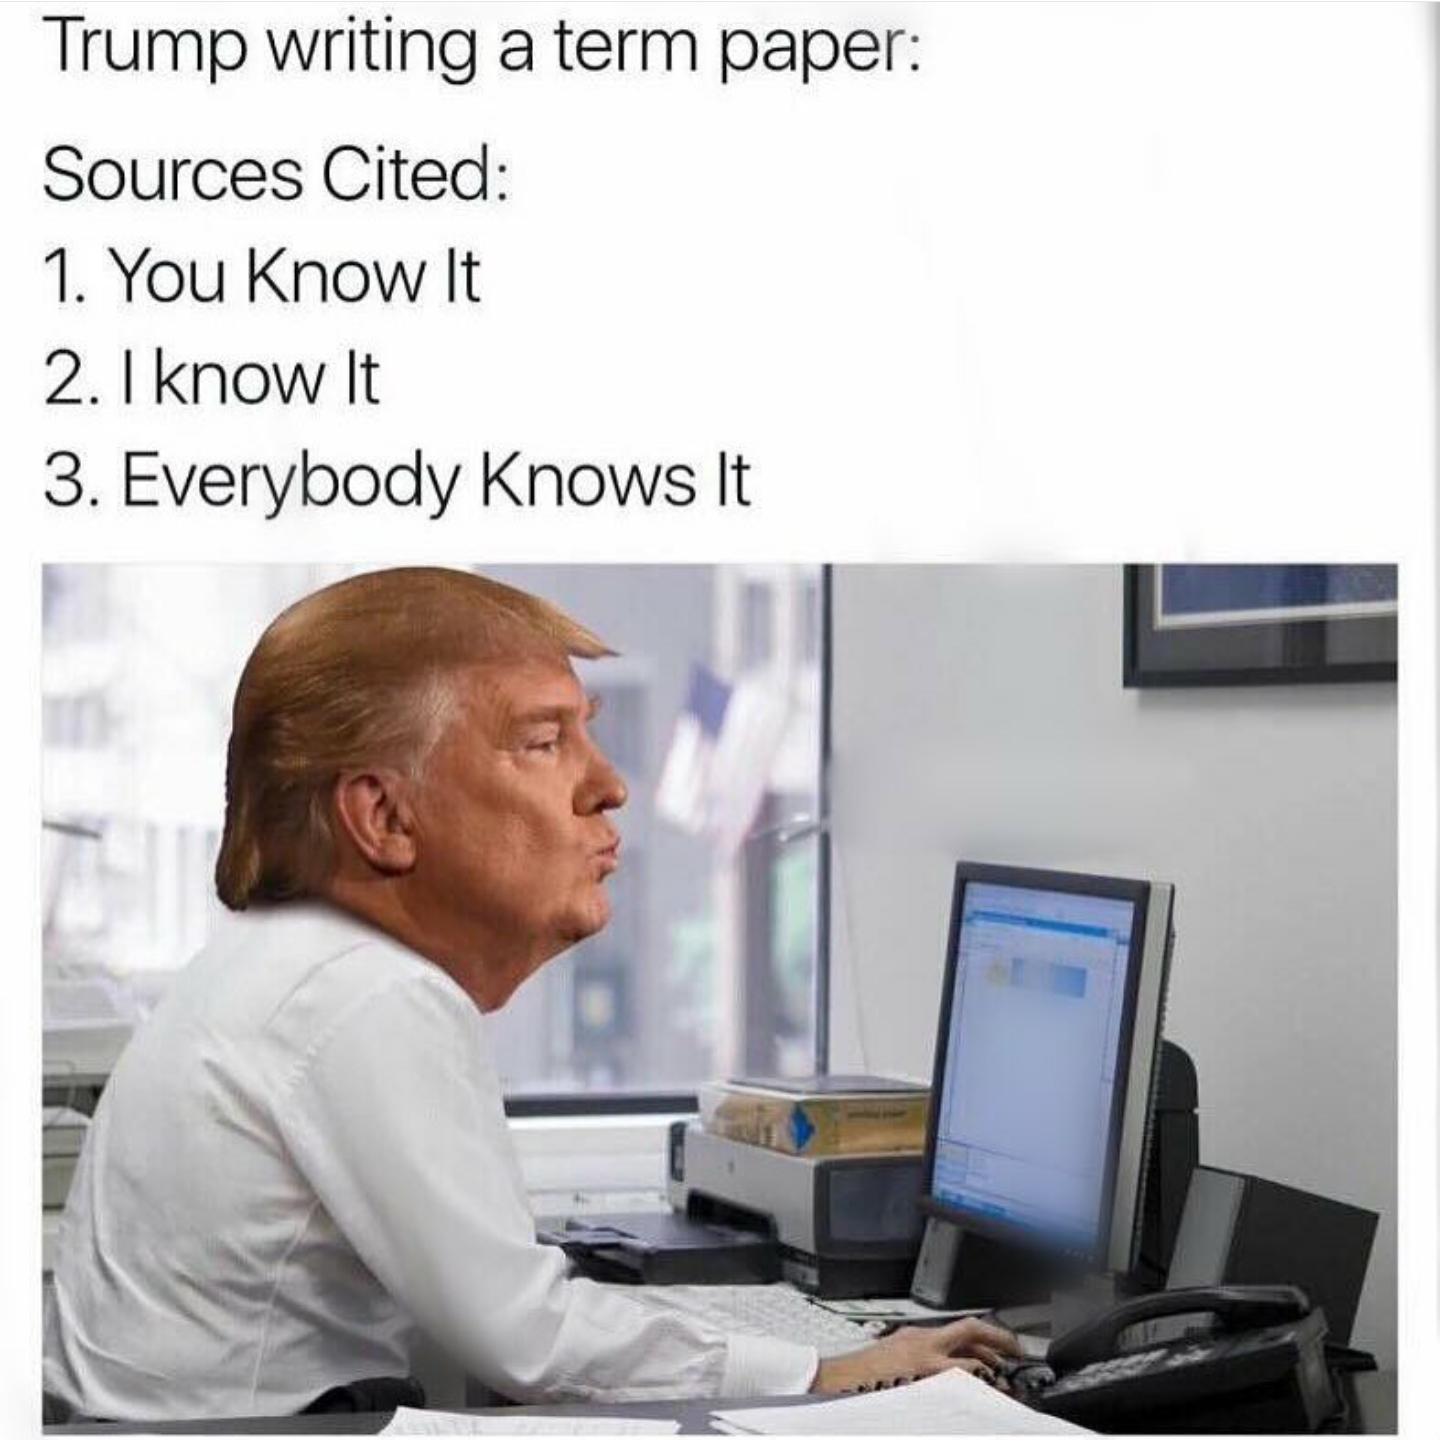 you know it i know it everybody knows it trump - Trump writing a term paper Sources Cited 1. You Know It 2. I know It 3. Everybody knows It